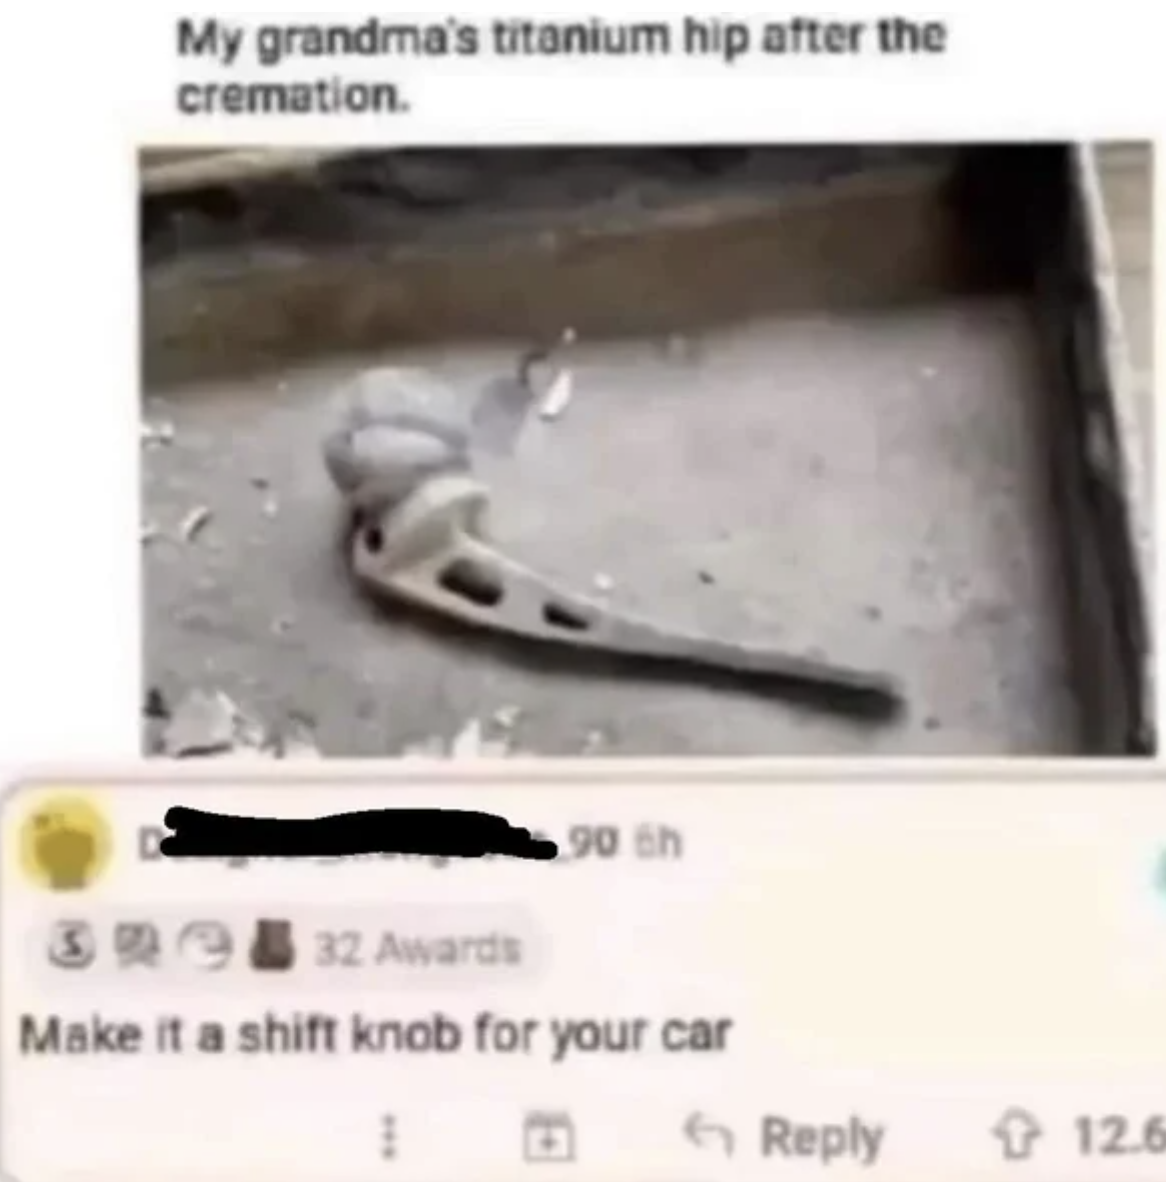 Cursed Comments - recycling meems - My grandma's titanium hip after the cremation.